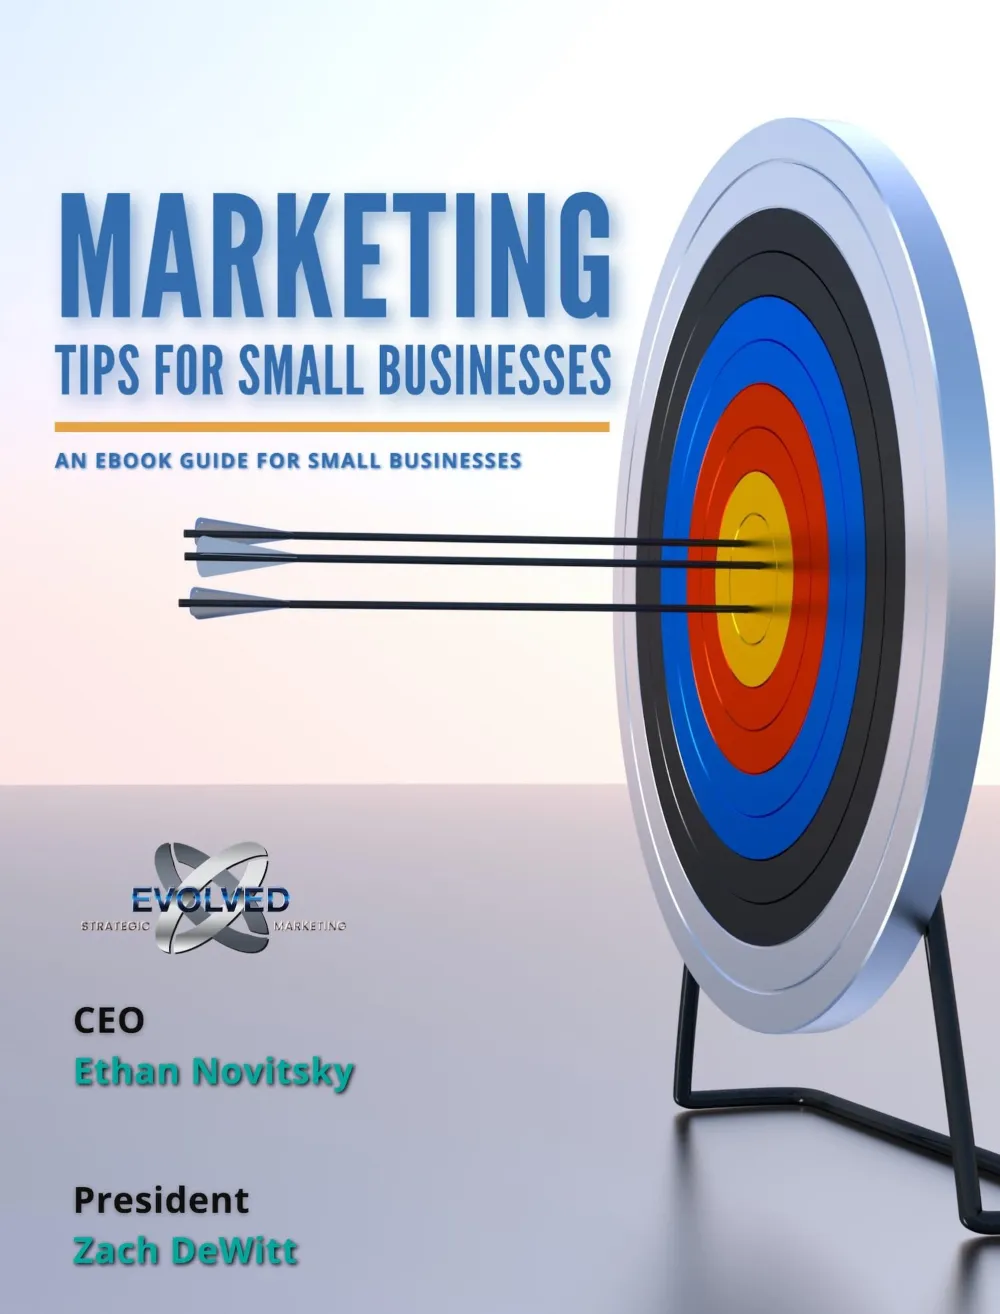 online marketing for small businesses